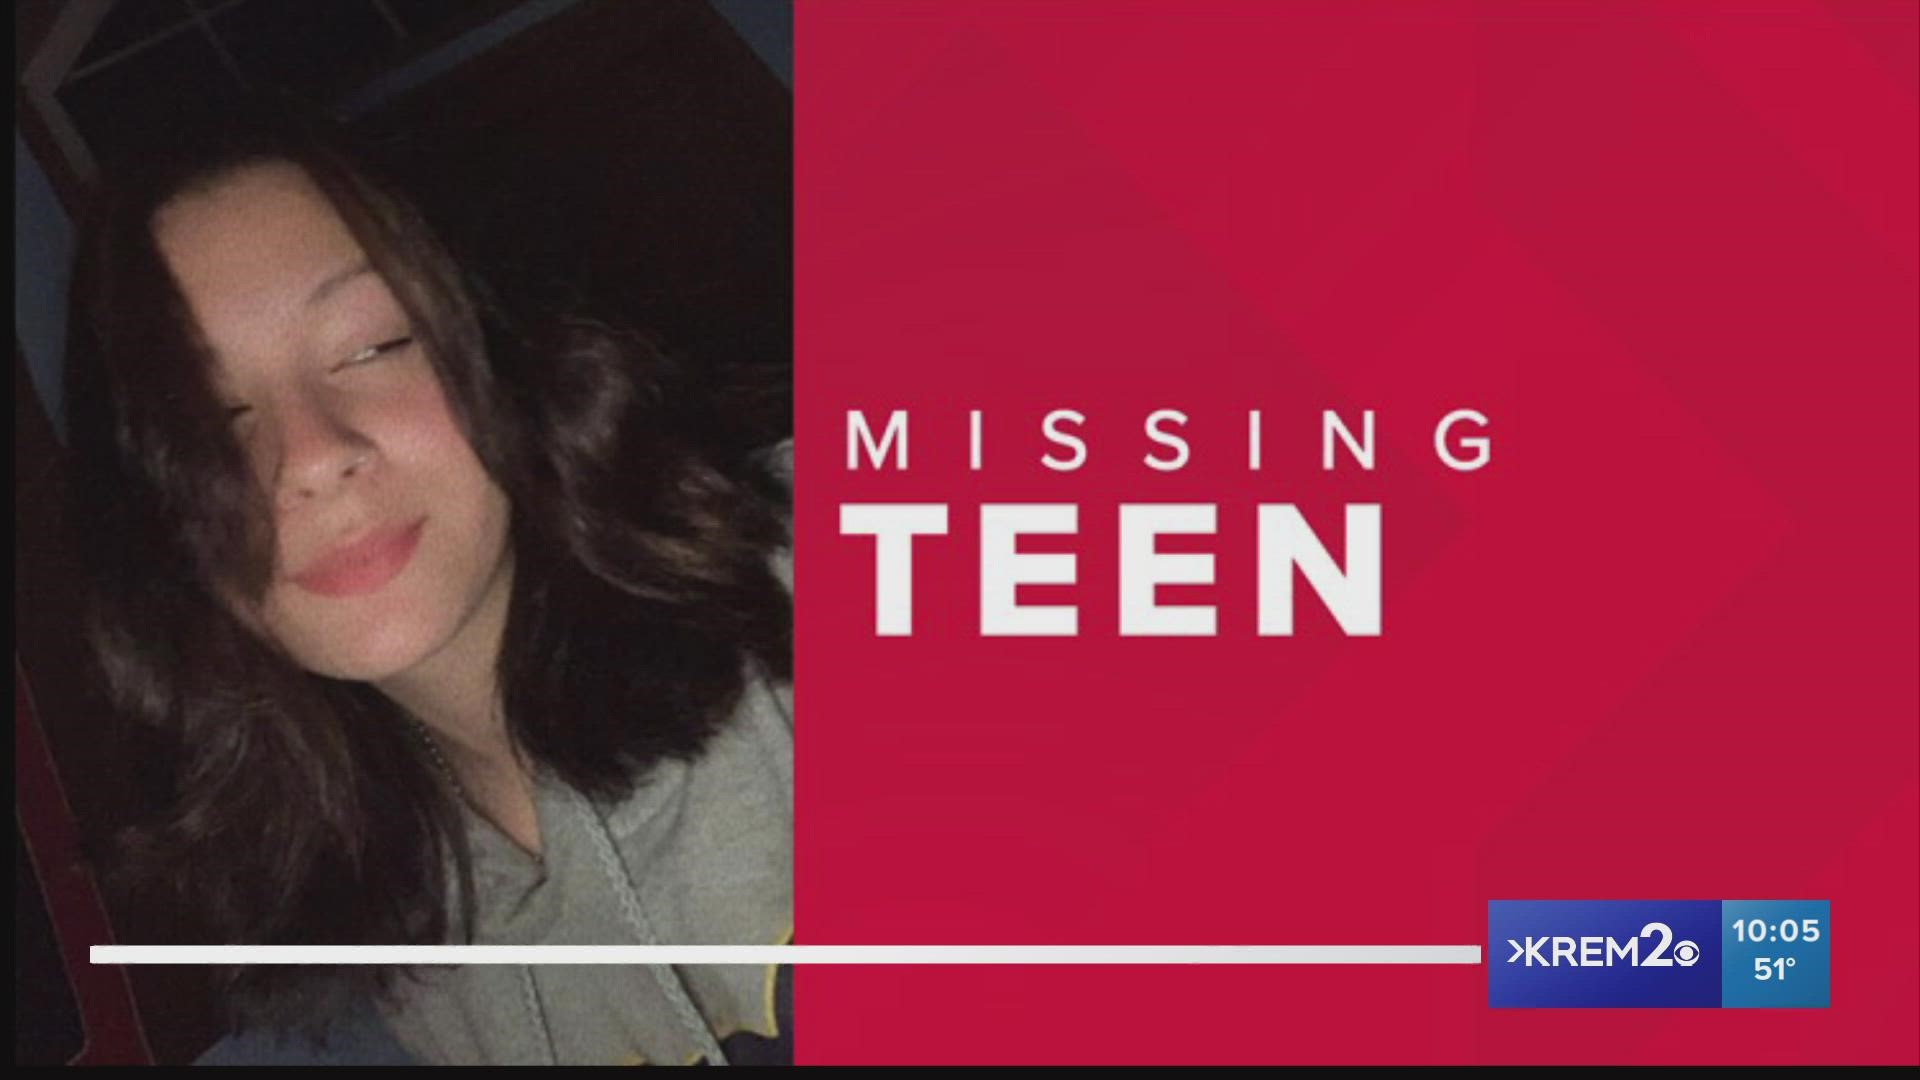 A 13-year-old teen went missing Saturday in Sandpoint